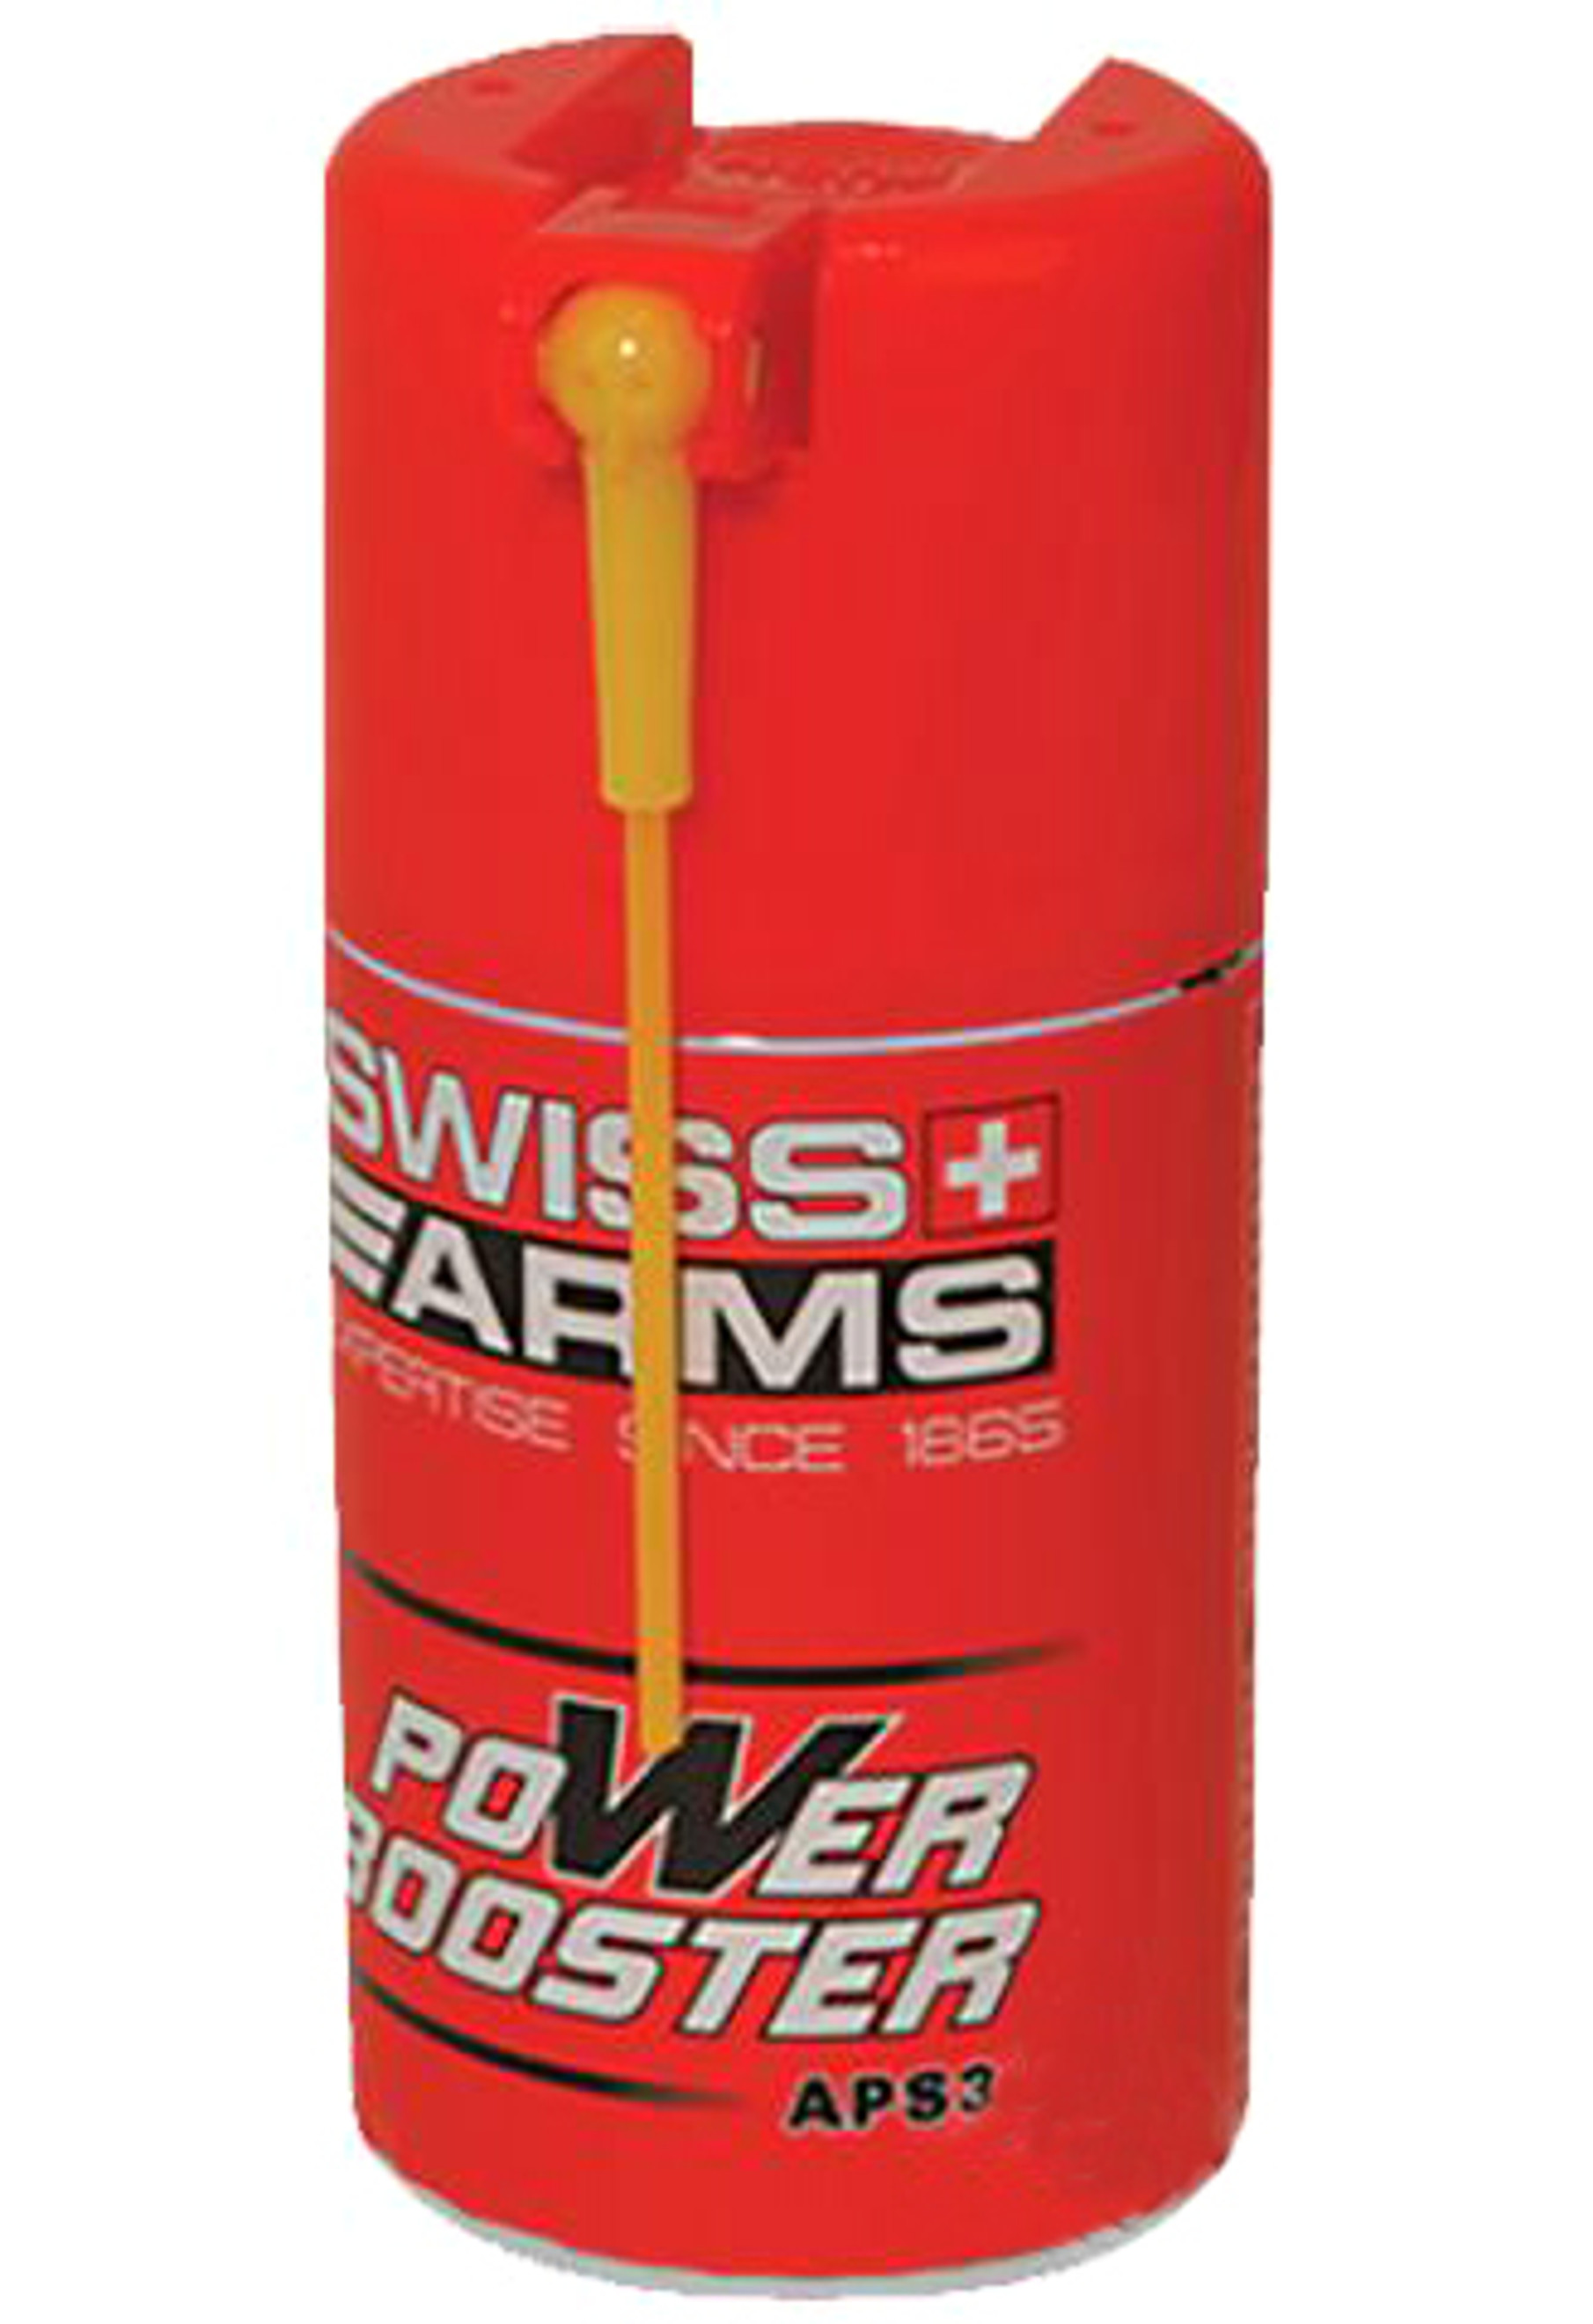 Swiss Arms "eXtrem" 160ml APS3 Silicone Oil Spray w/ Adjustable Nozzle